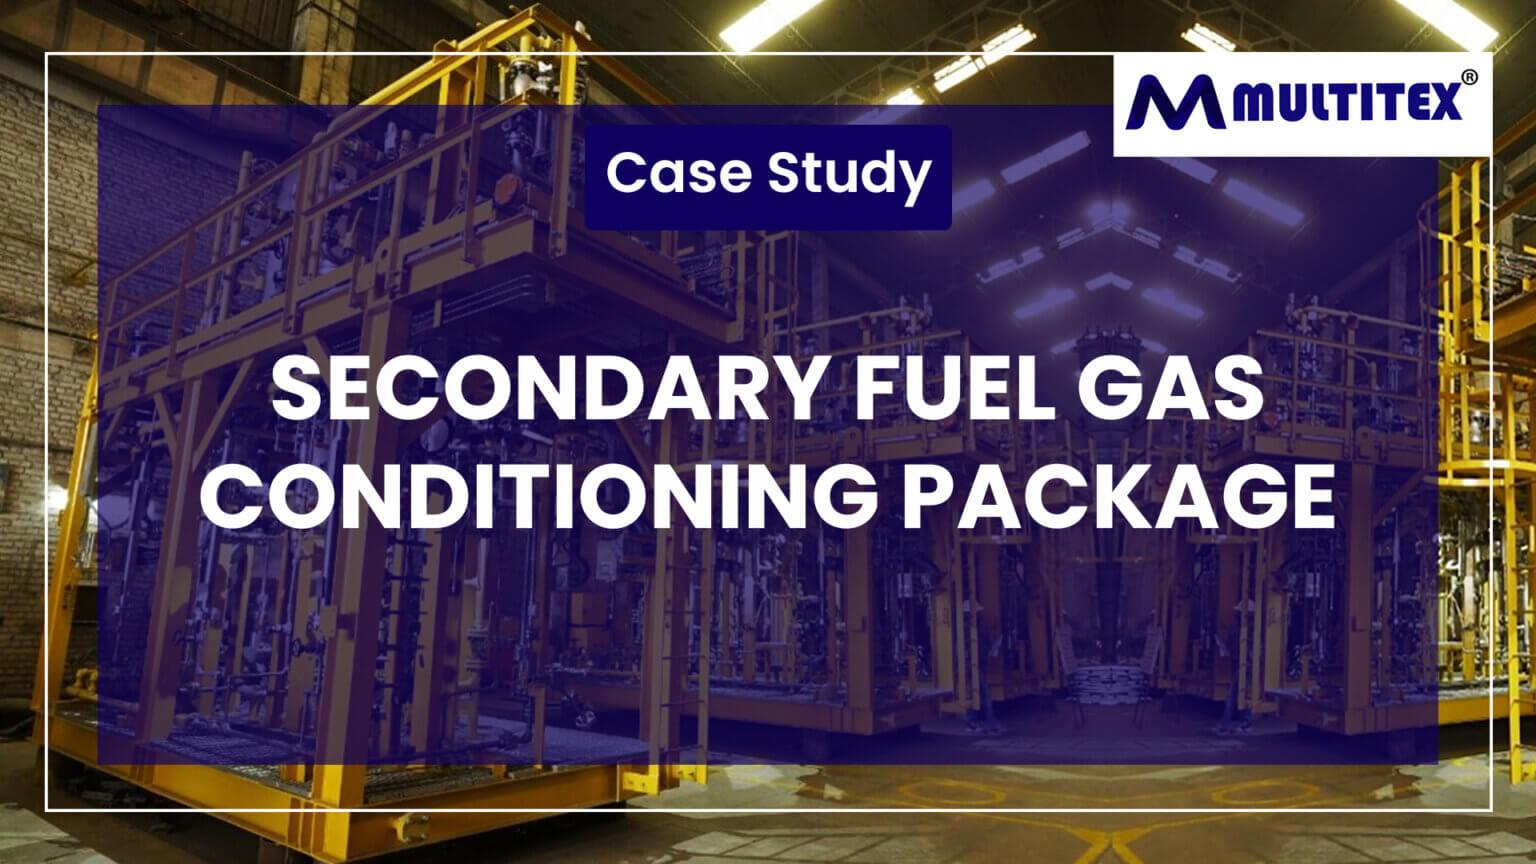 SECONDARY FUEL GAS CONDITIONING PACKAGE